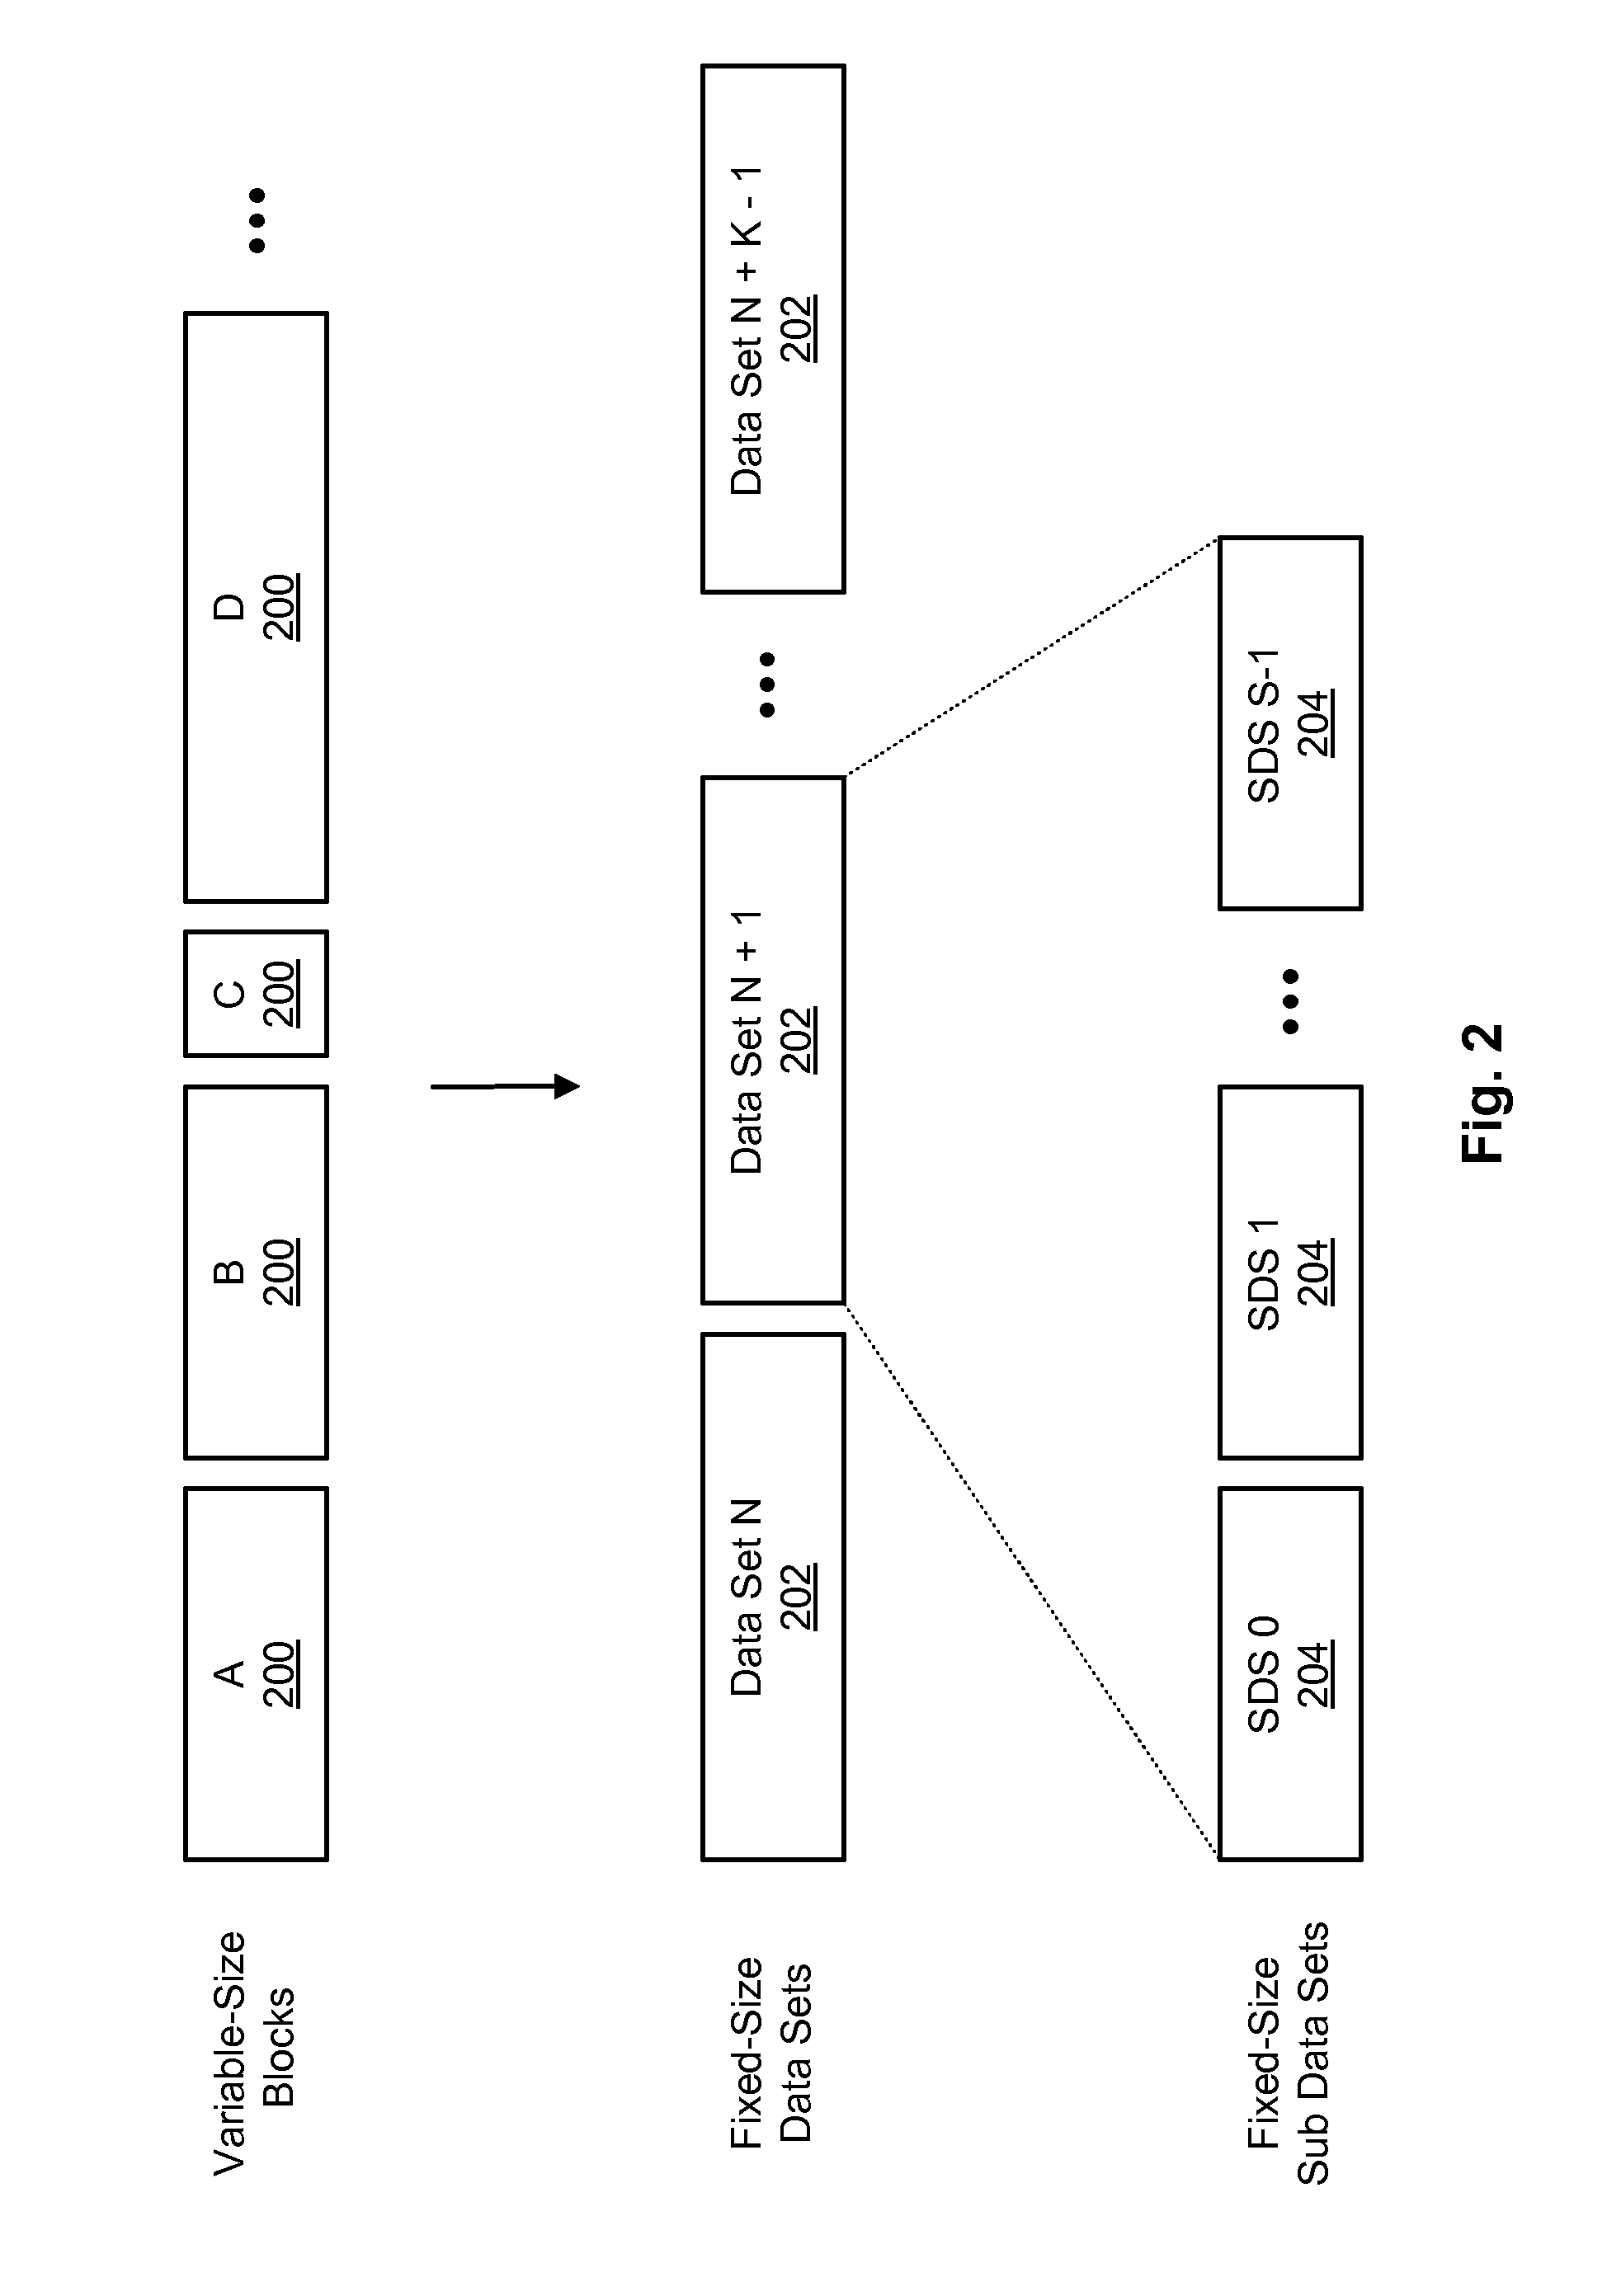 Tape layout design for reliable ECC decoding